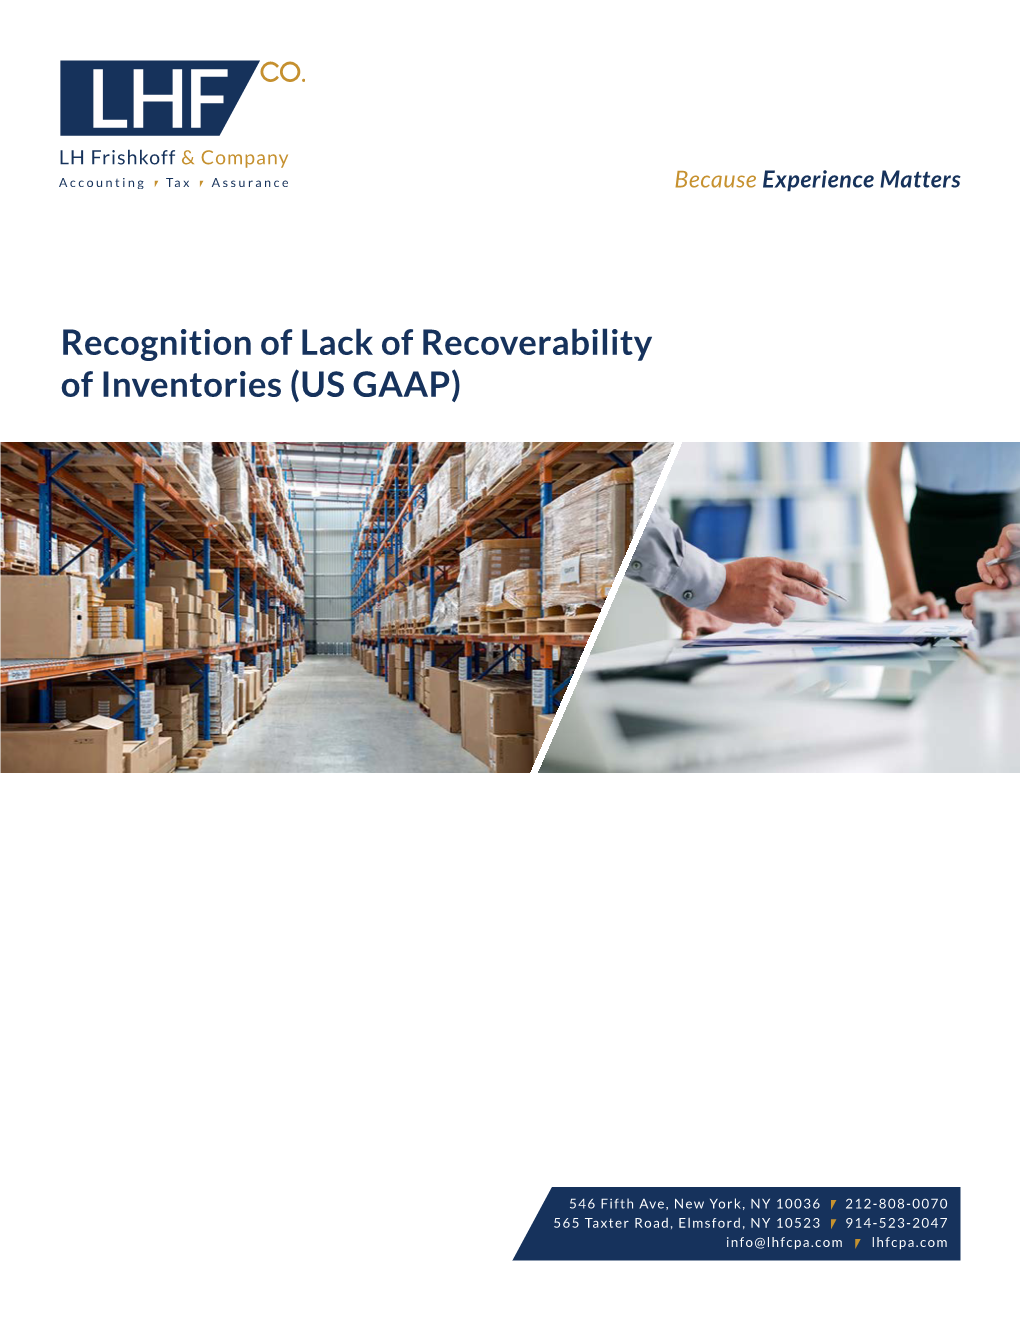 Recognition of Lack of Recoverability of Inventories (US GAAP)